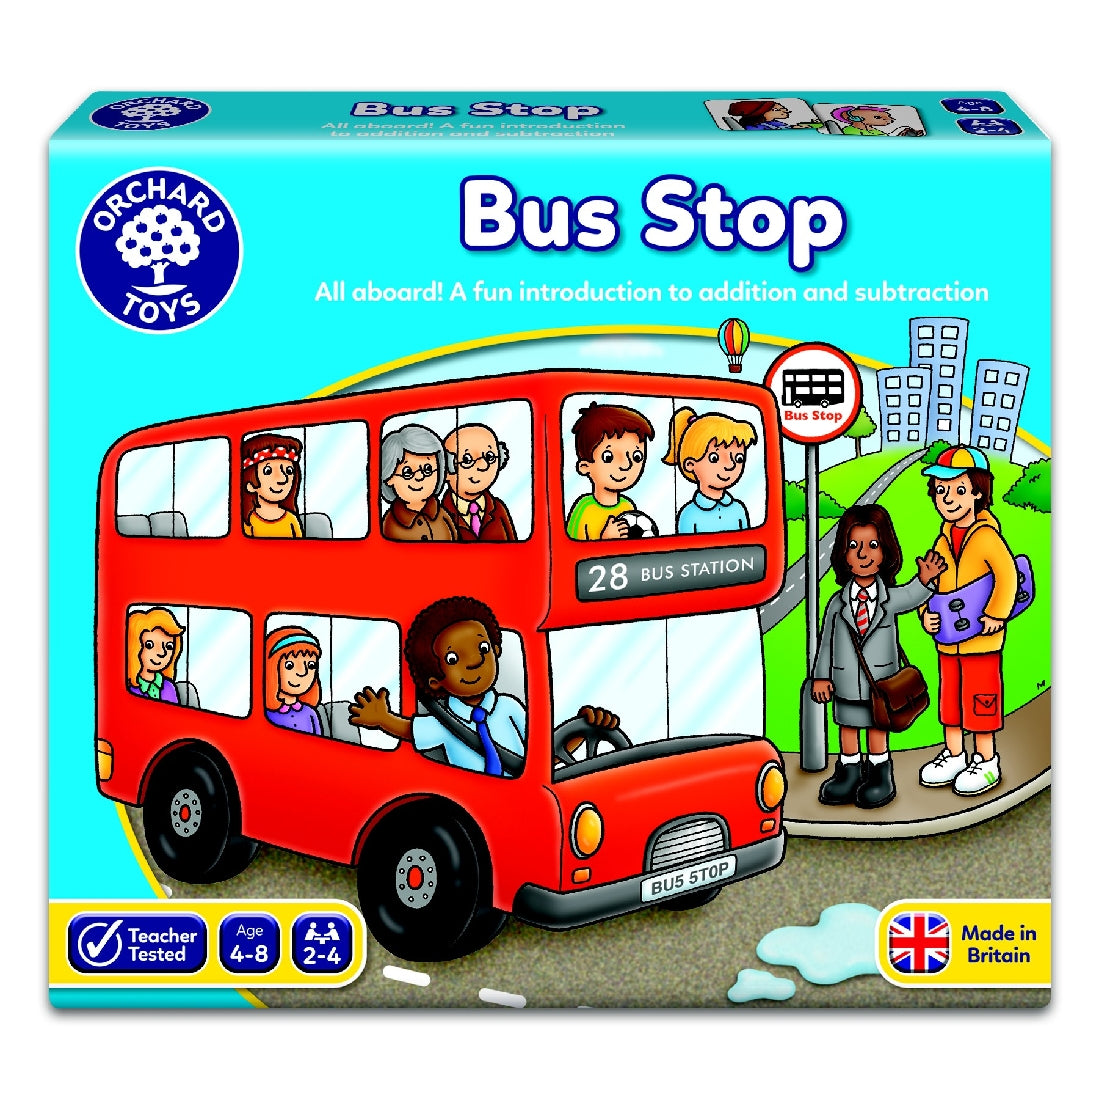 ORCHARD TOYS - BUS STOP GAME